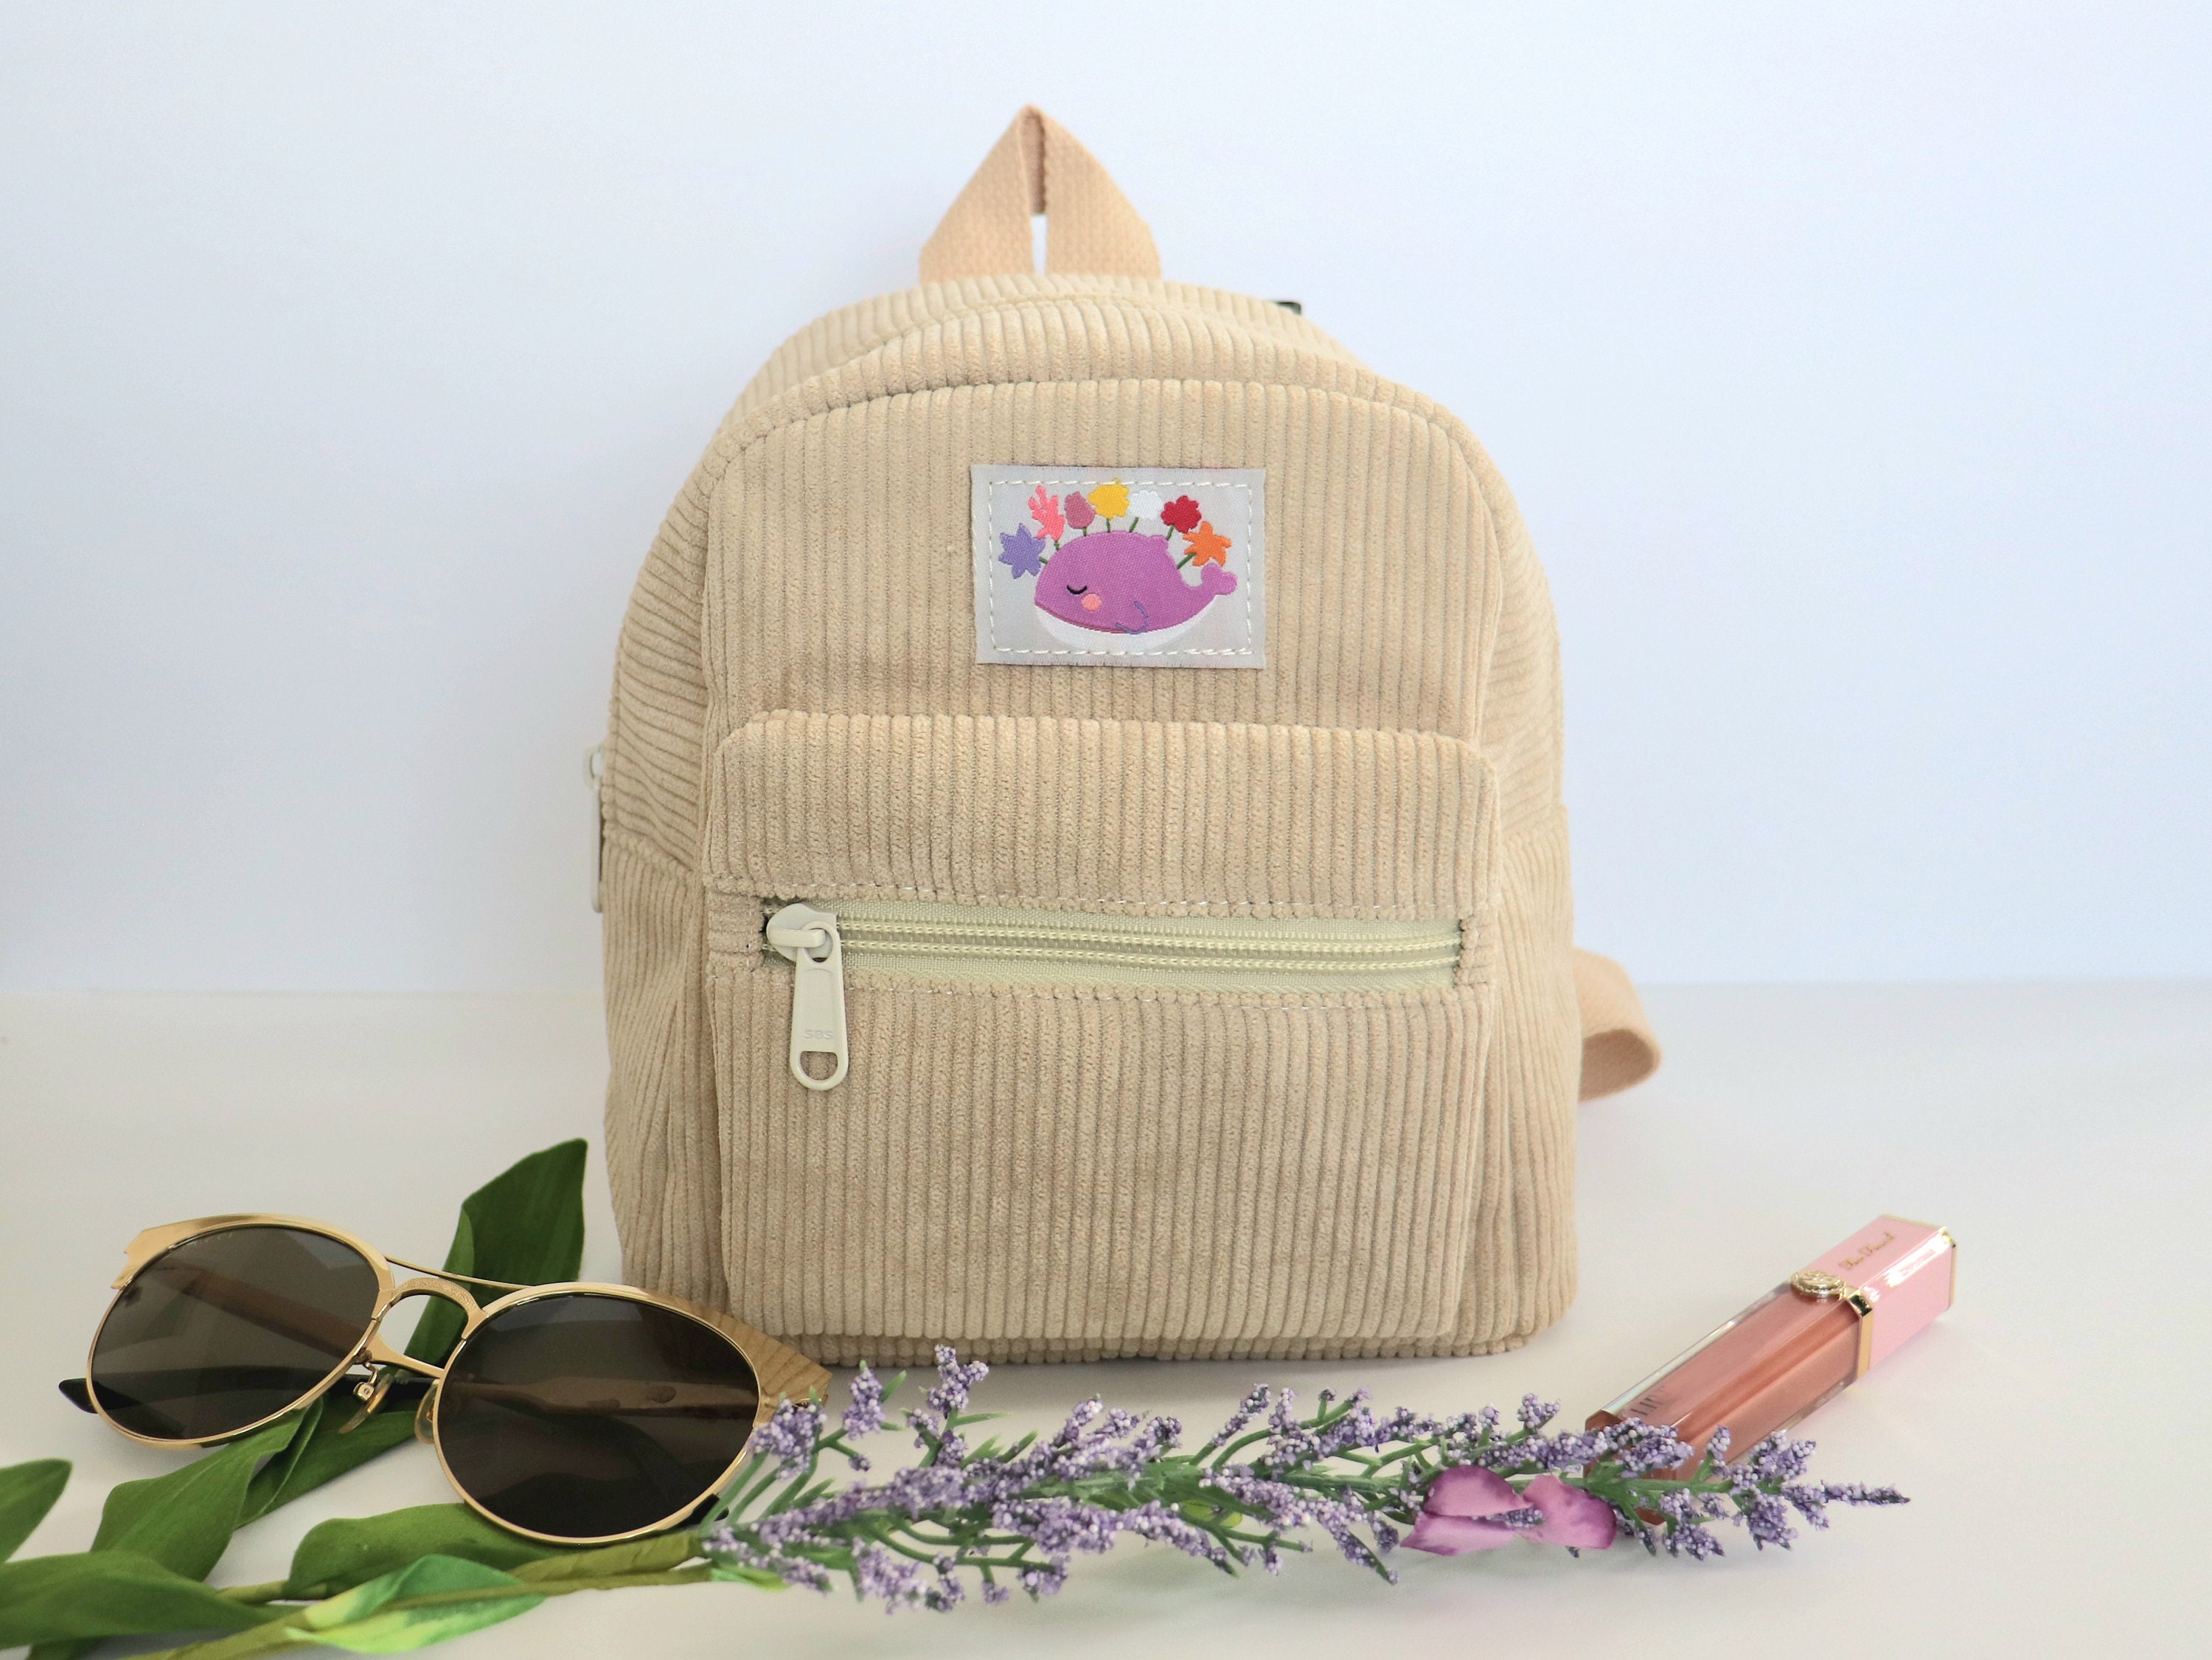 Buy ManalCorp BTS Backpack bags for Girls with Free 25 Piece BTS Sticker  set Included,(E) Online at desertcartINDIA